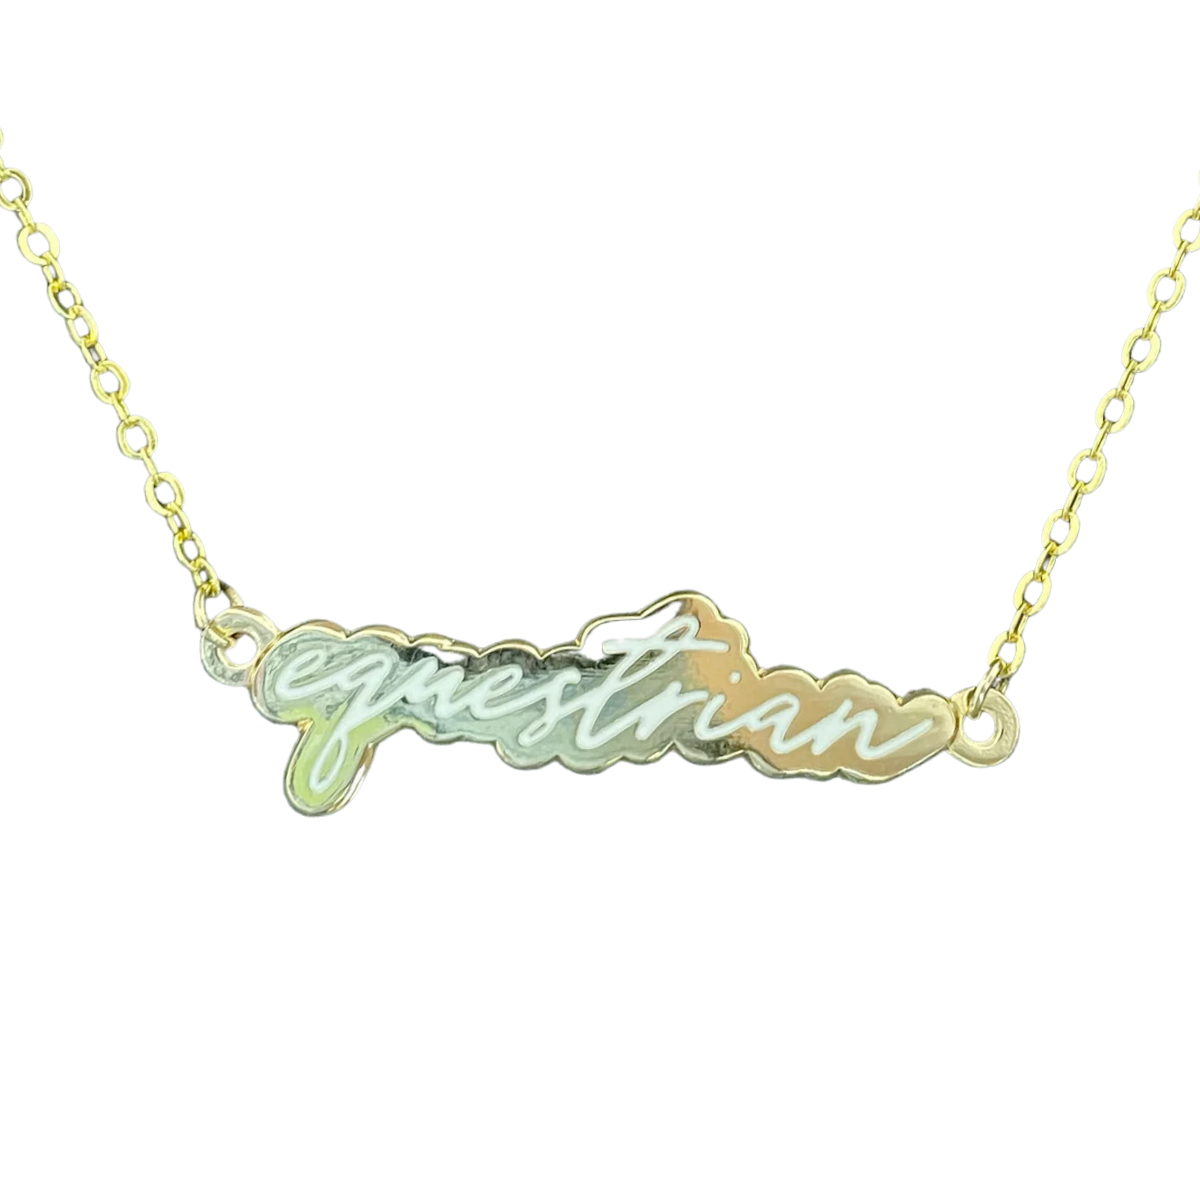 Dapplebay &quot;Equestrian&quot; Necklace in Gold - One Size